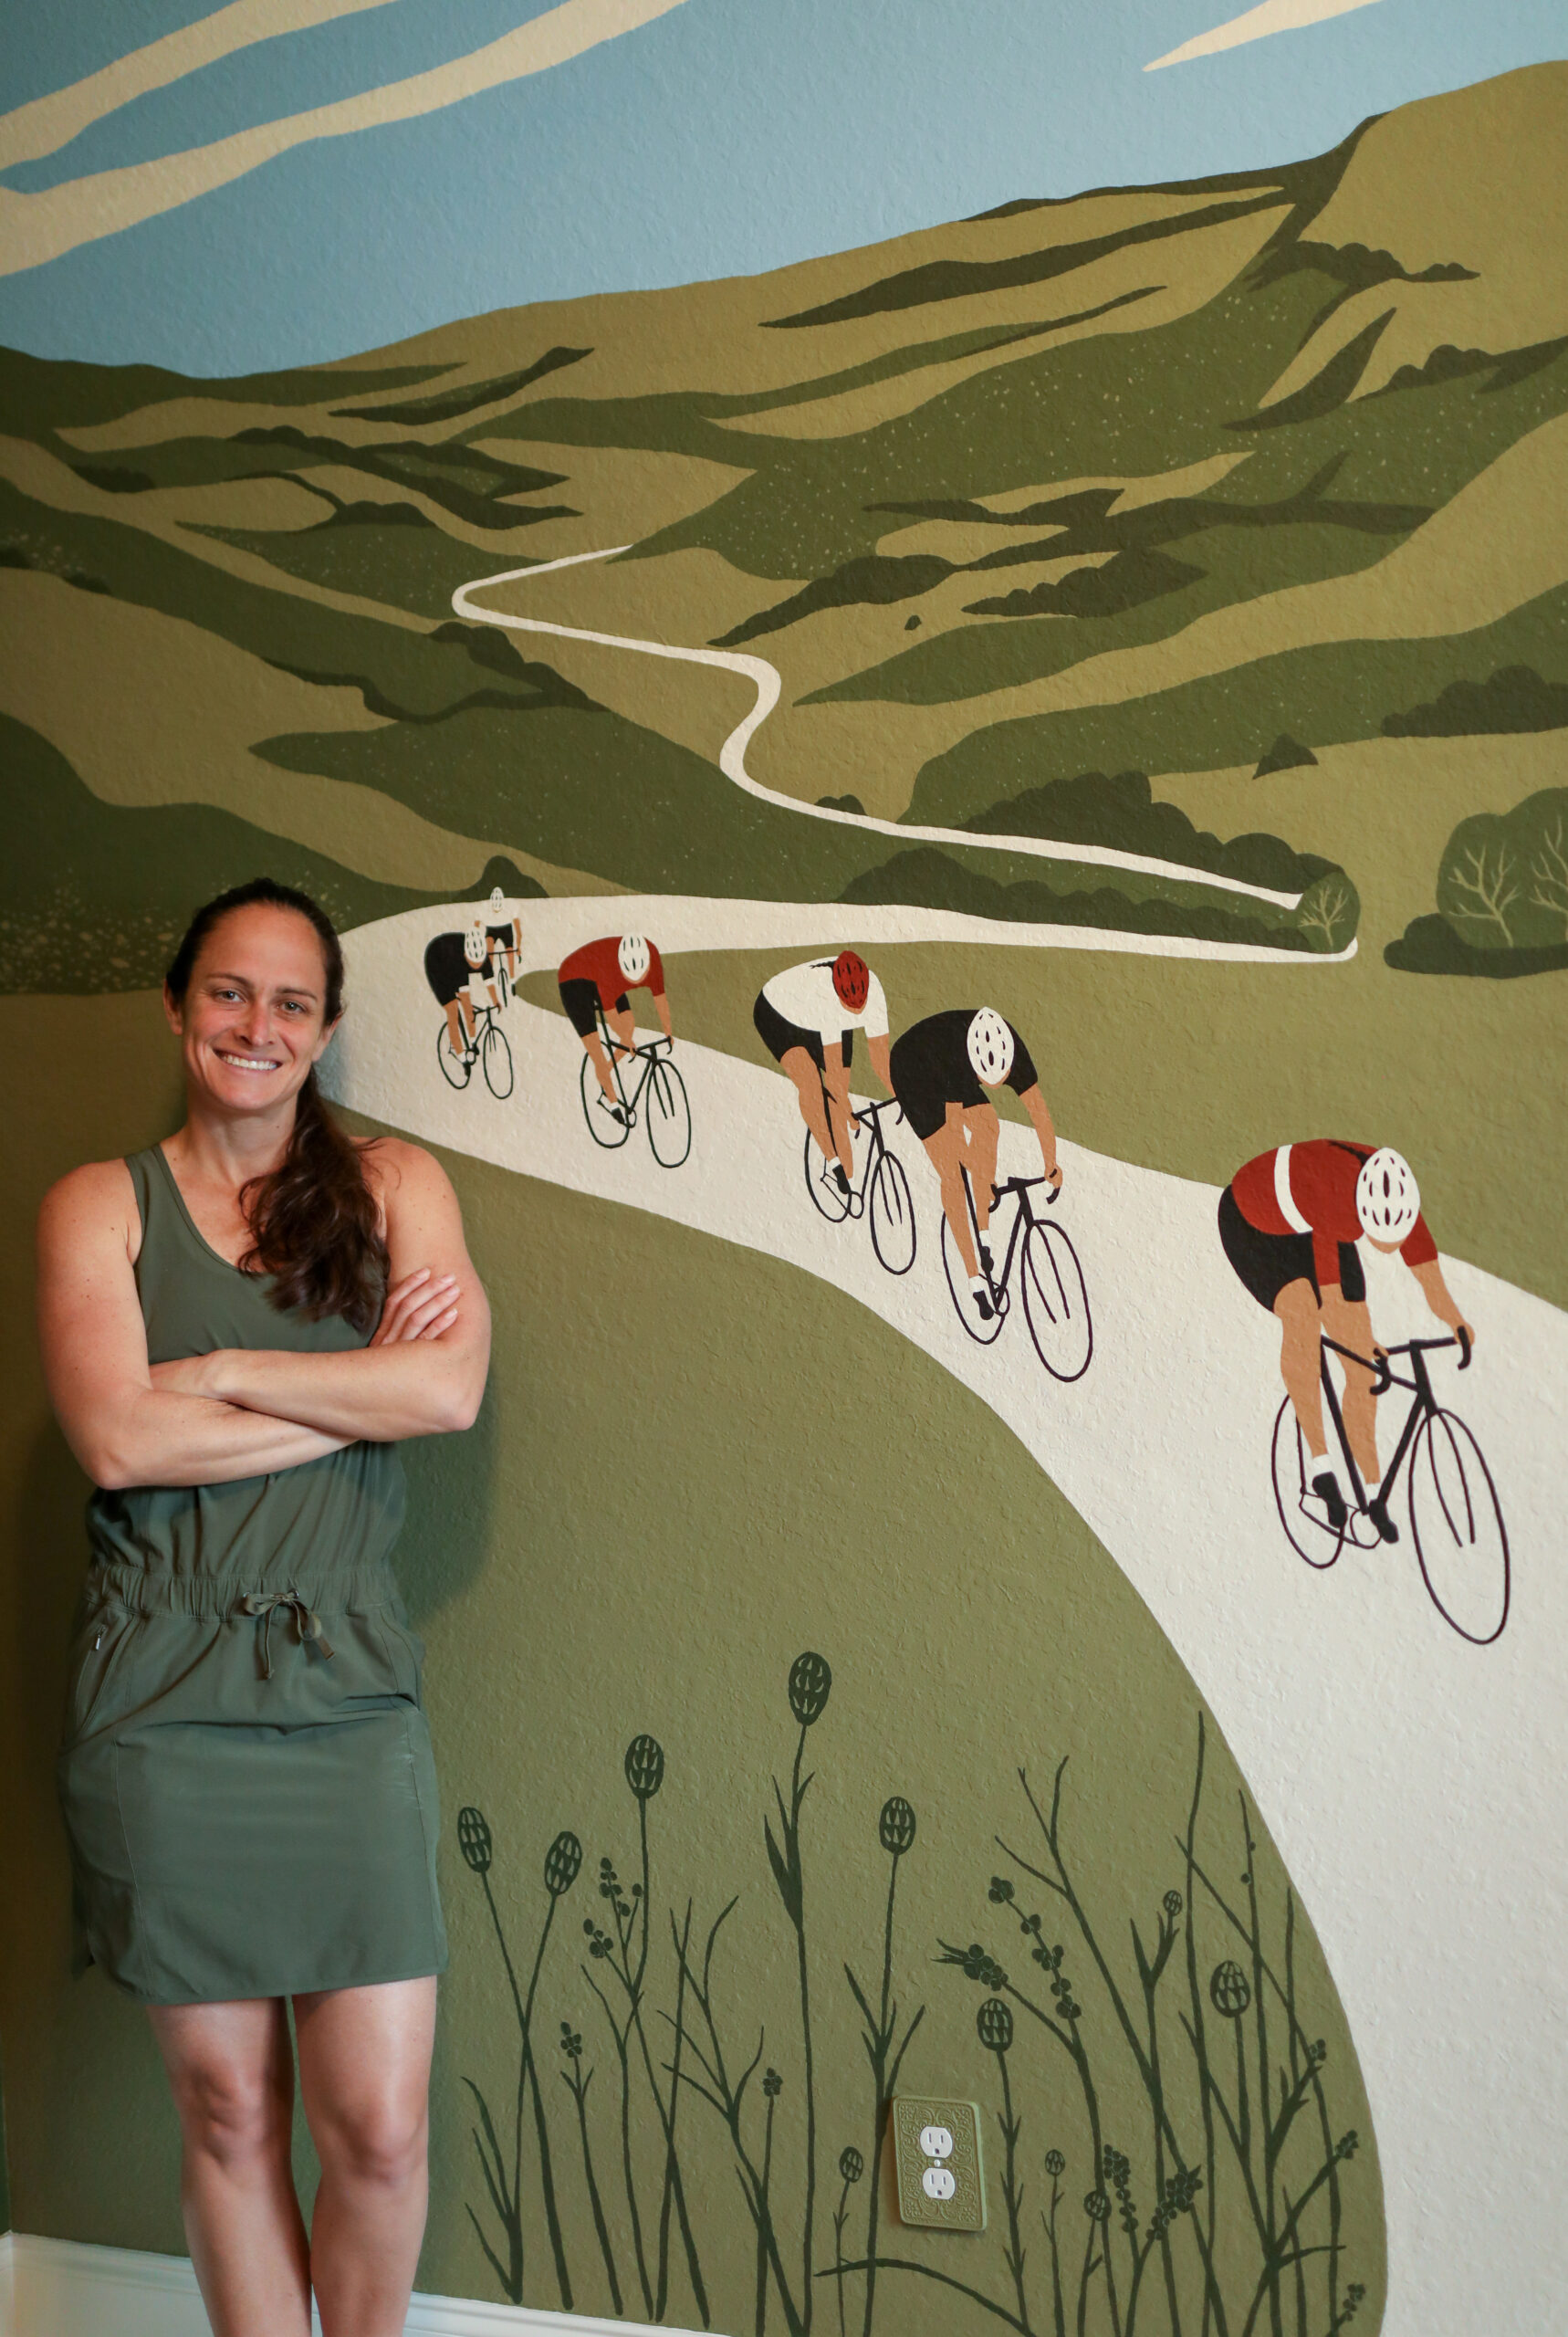 A cycling mural on a wall